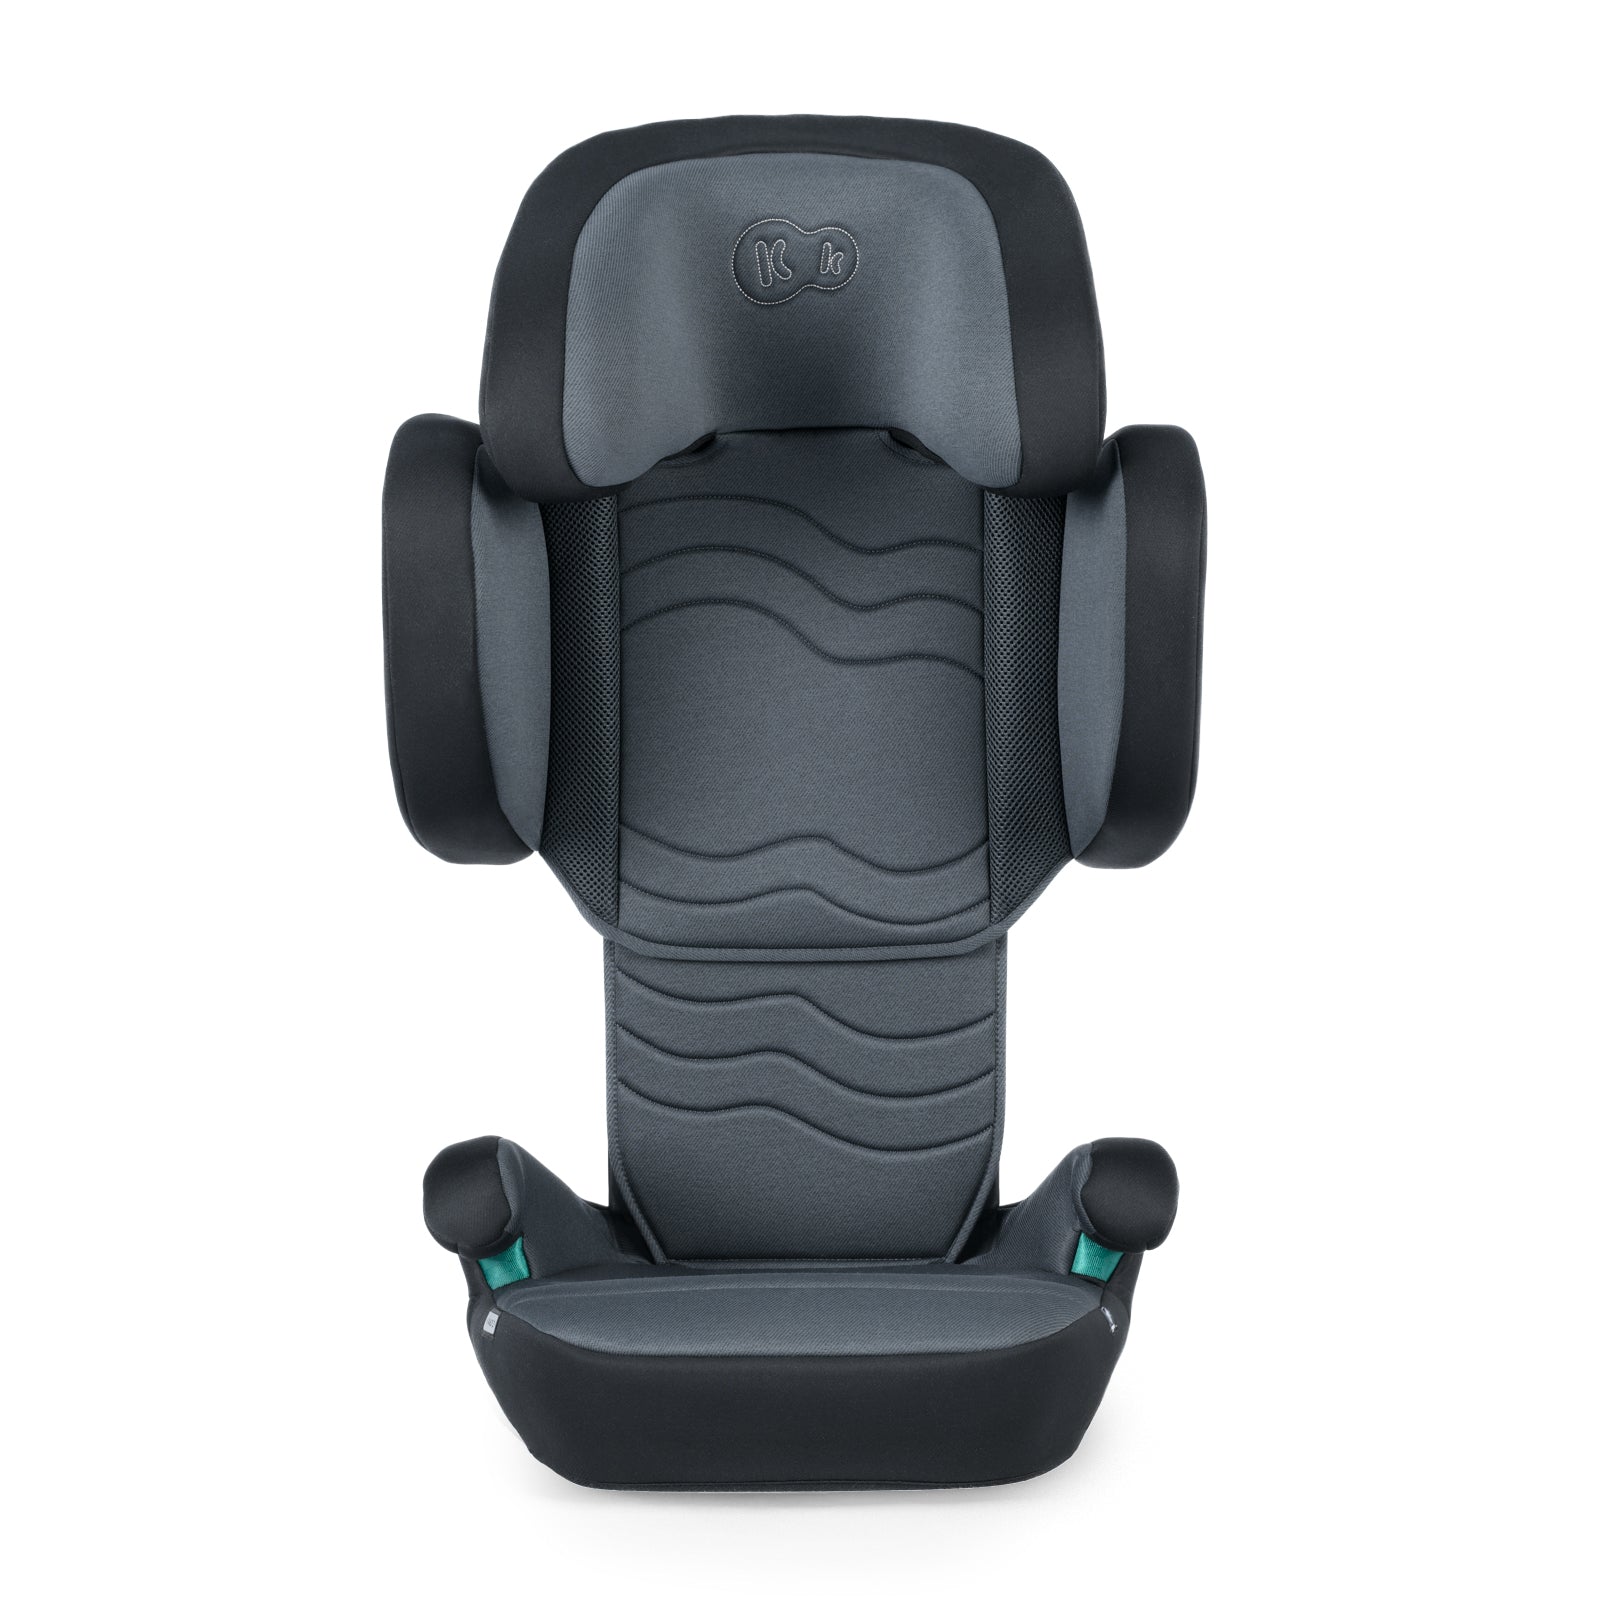 Review: Cybex Sirona Z i-Size R, Product Reviews